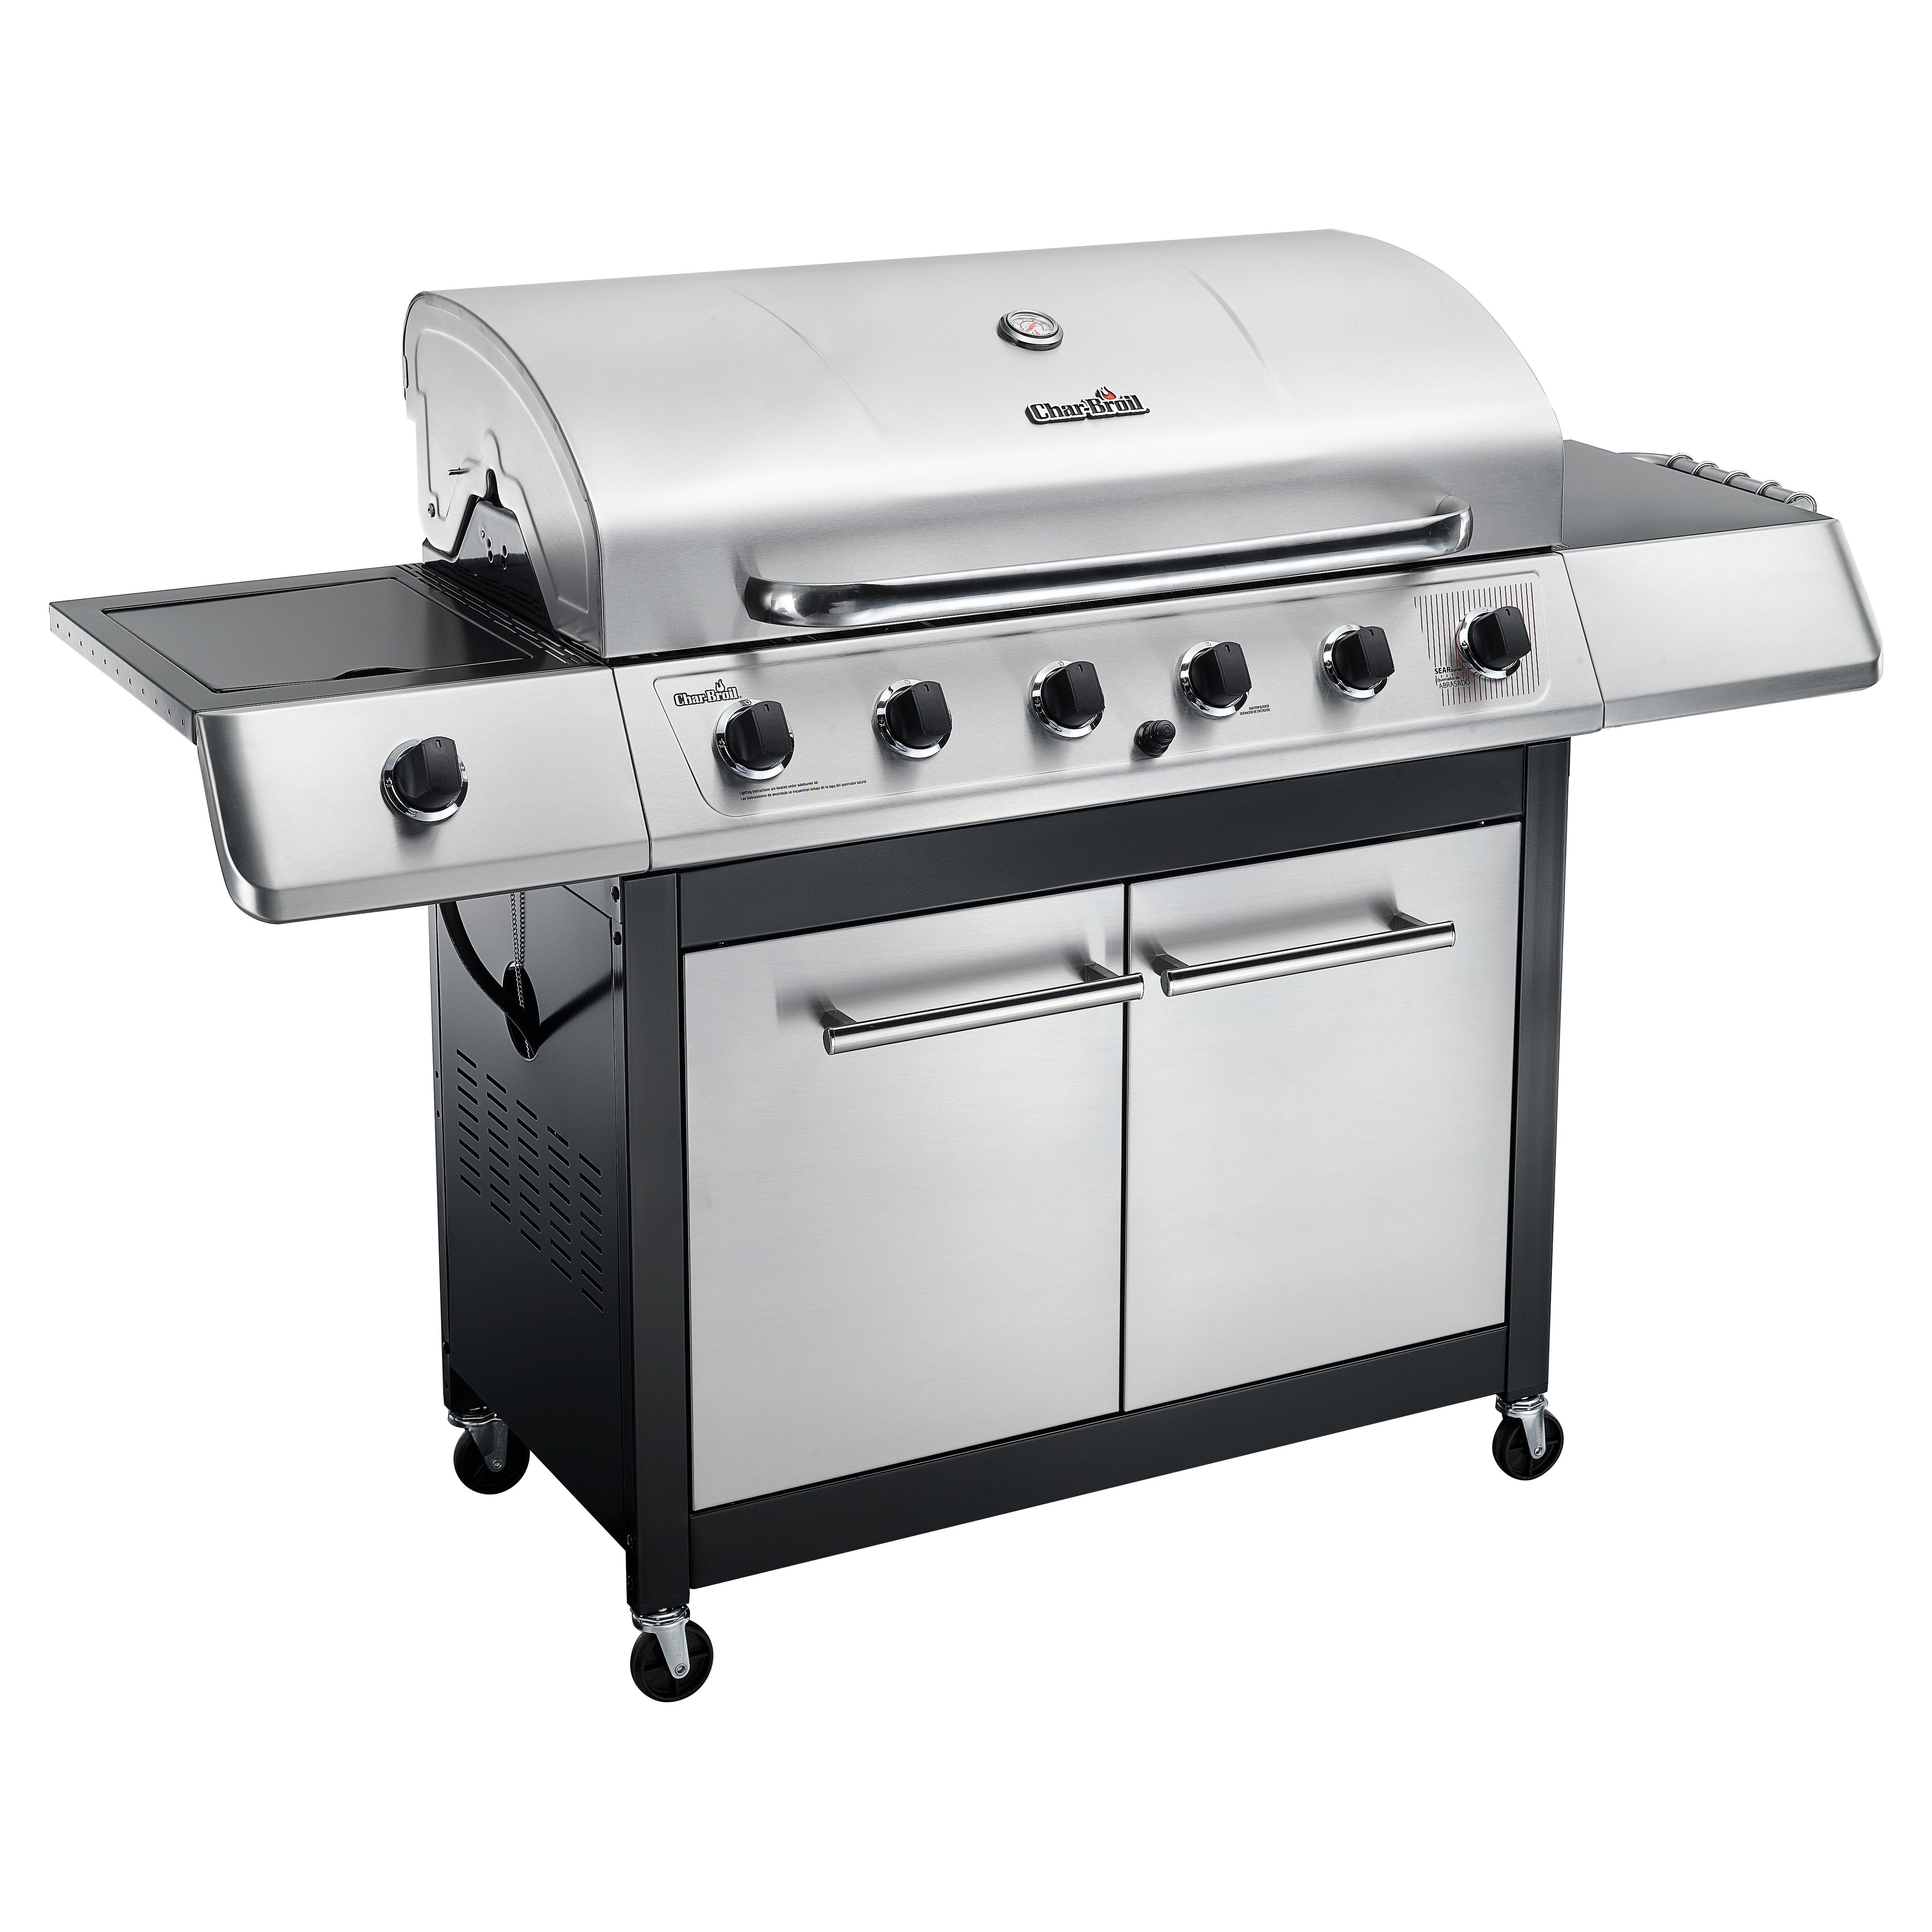 CharBroil Classic 6 Burner 65,000 BTU Gas Grill with Side Burner Char Broil 6 Burner Stainless Steel Gas Grill